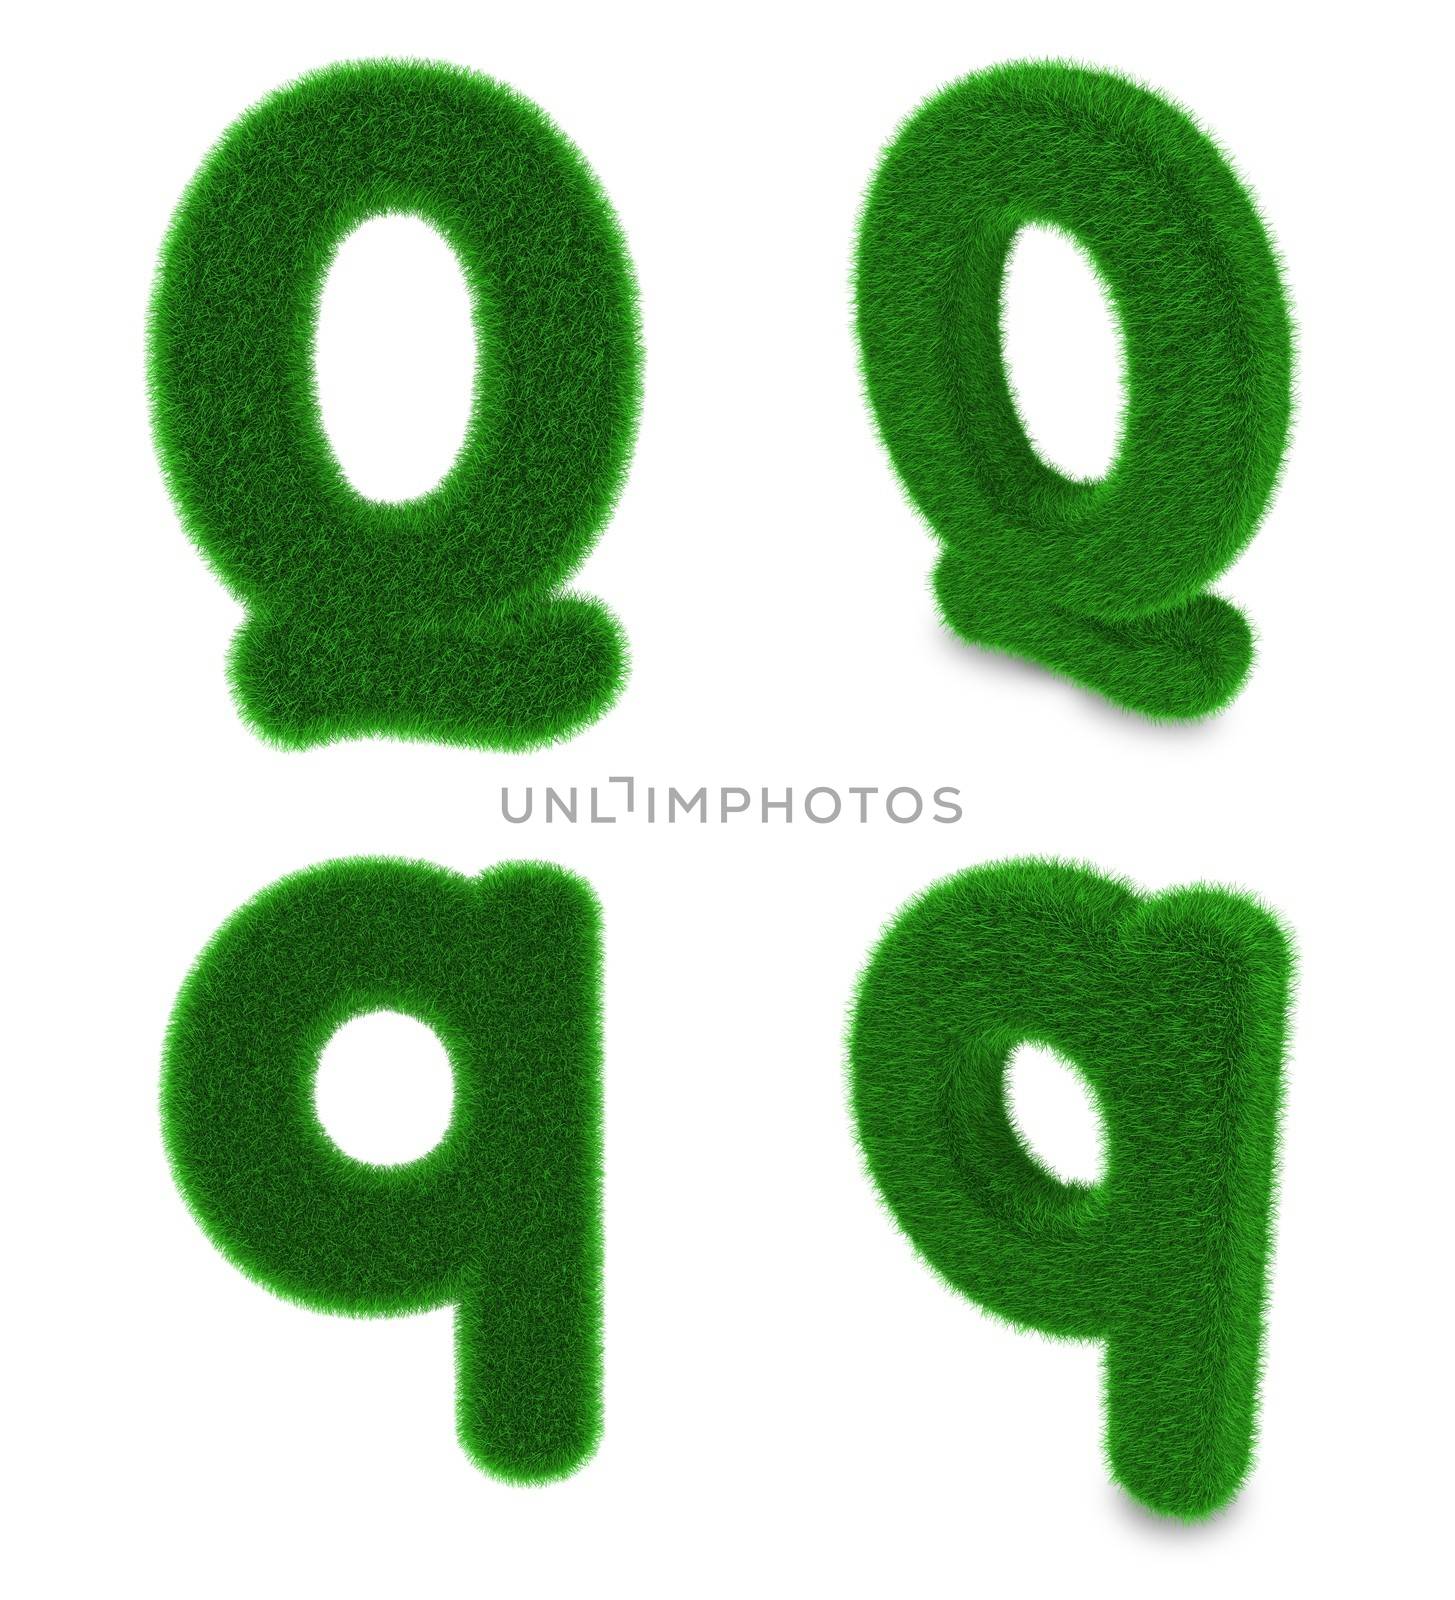 Letter Q made of grass by Harvepino